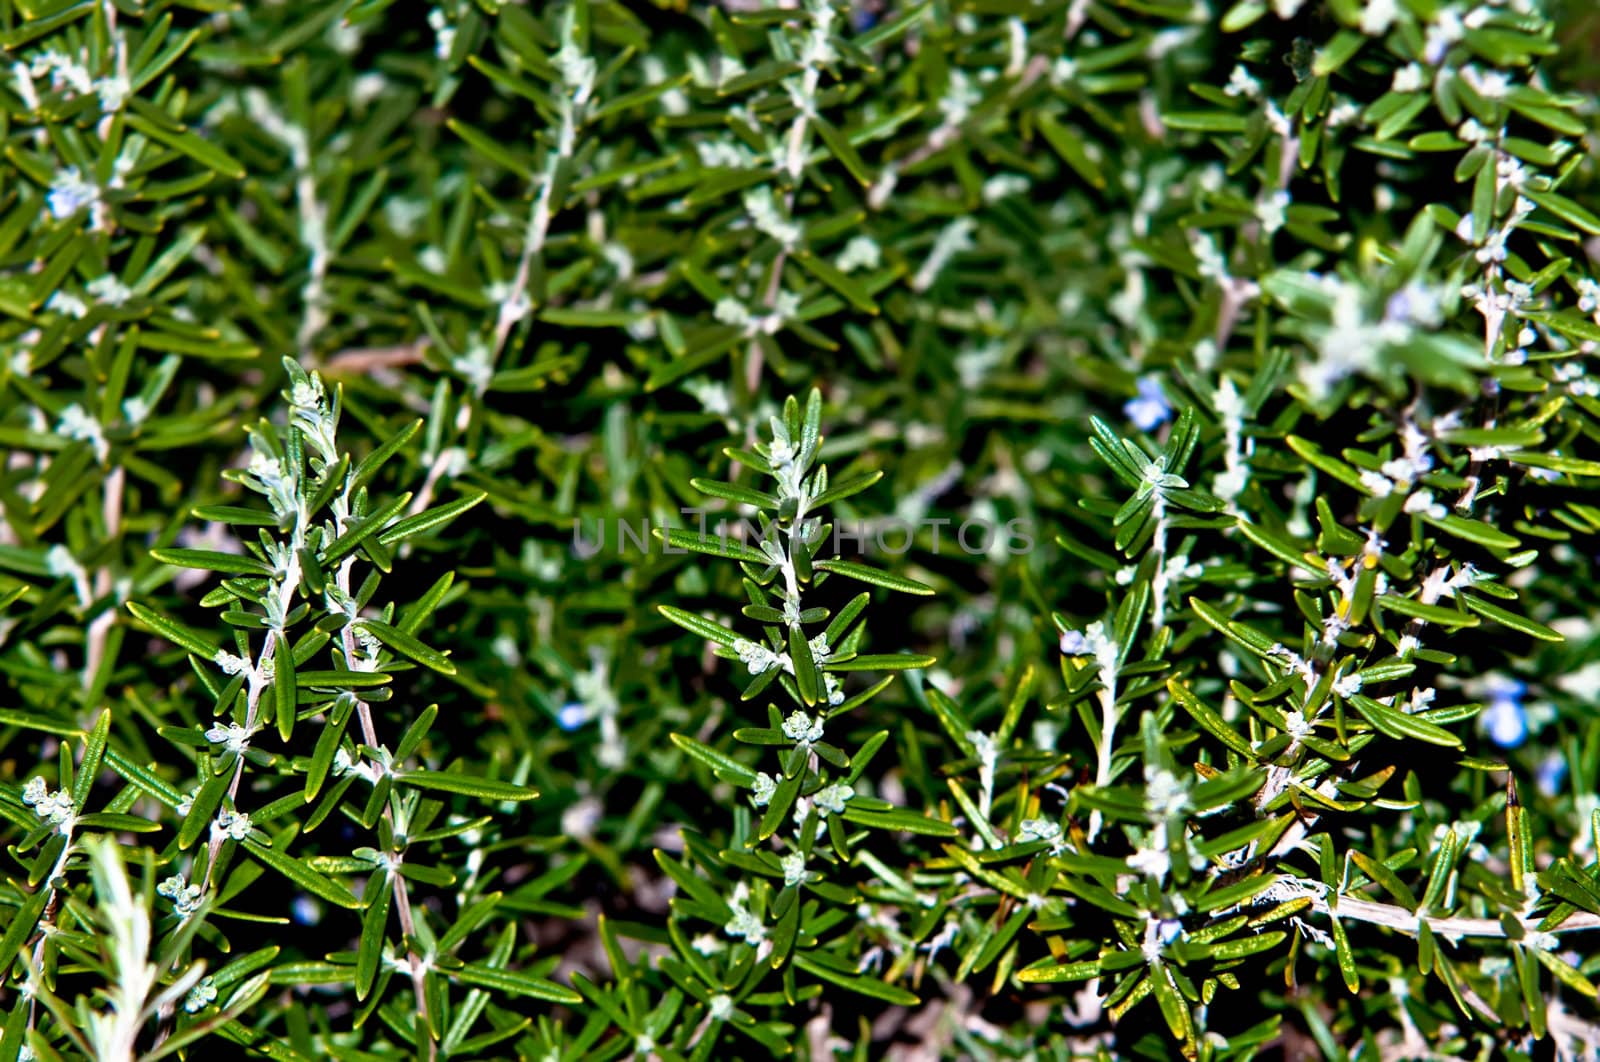 Rosemary aromatic culinary herb in nature .